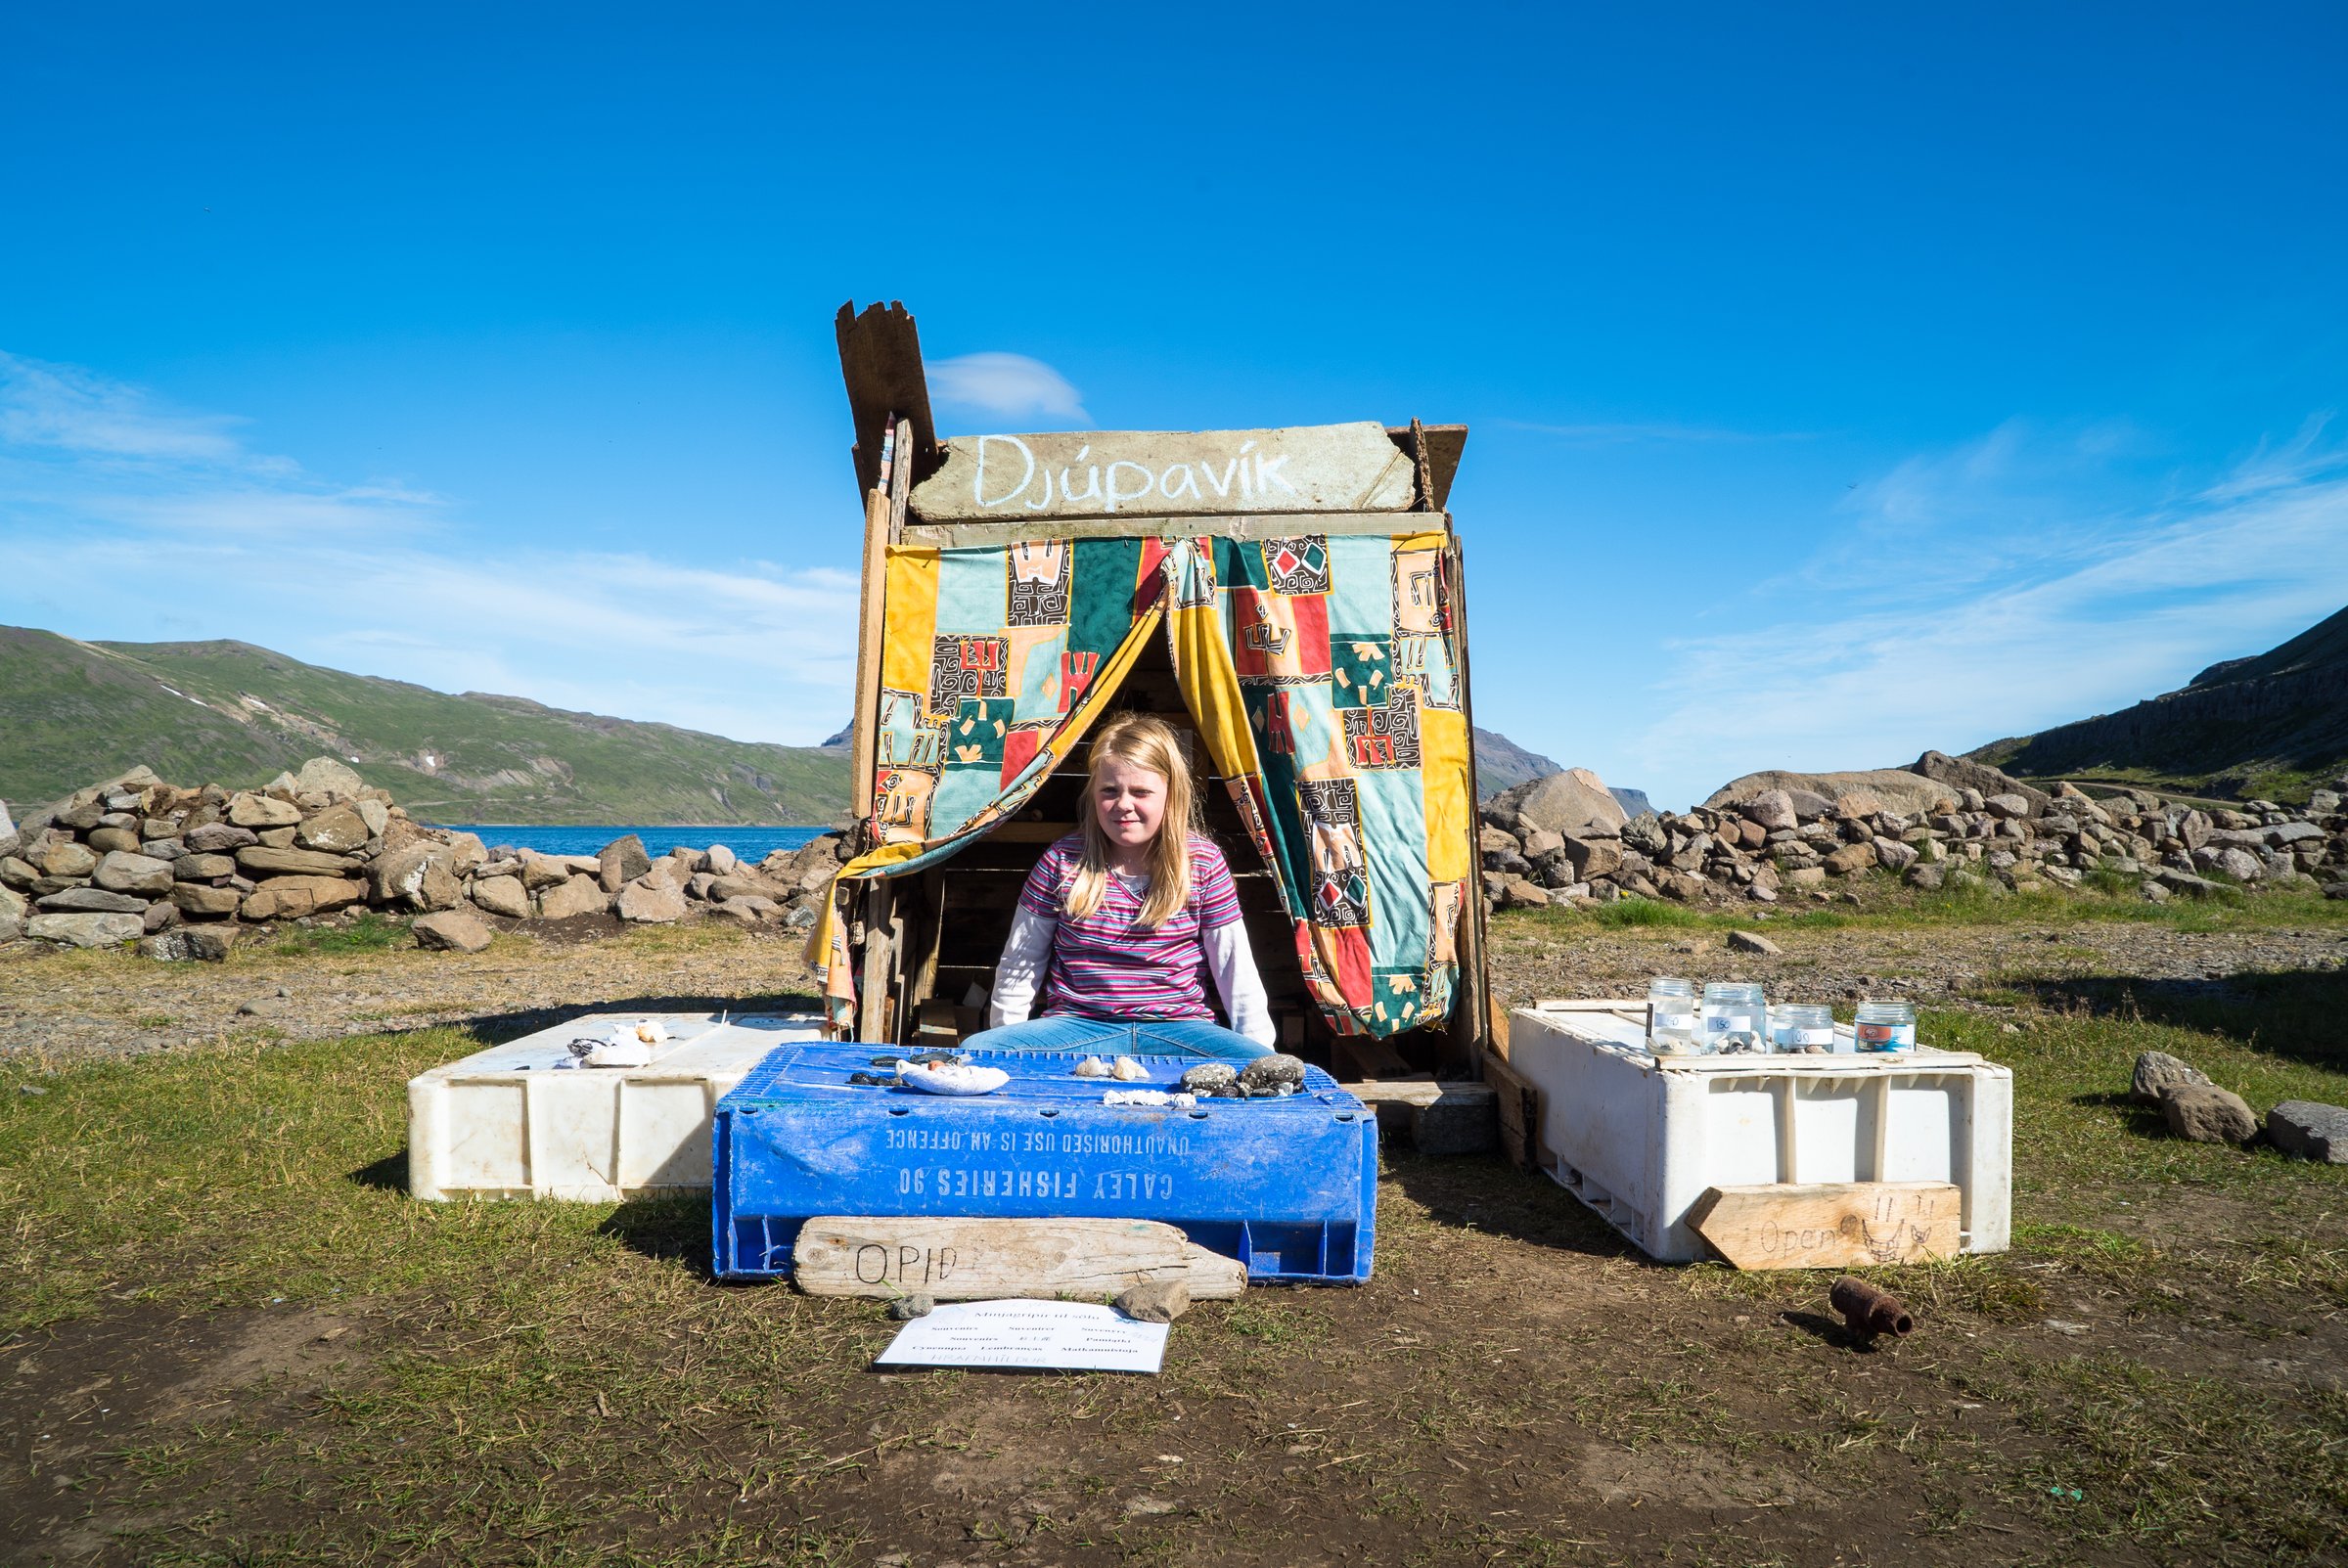 Young girl sitting in front of a self-made sales booth with the sign "Djúpavík" on it